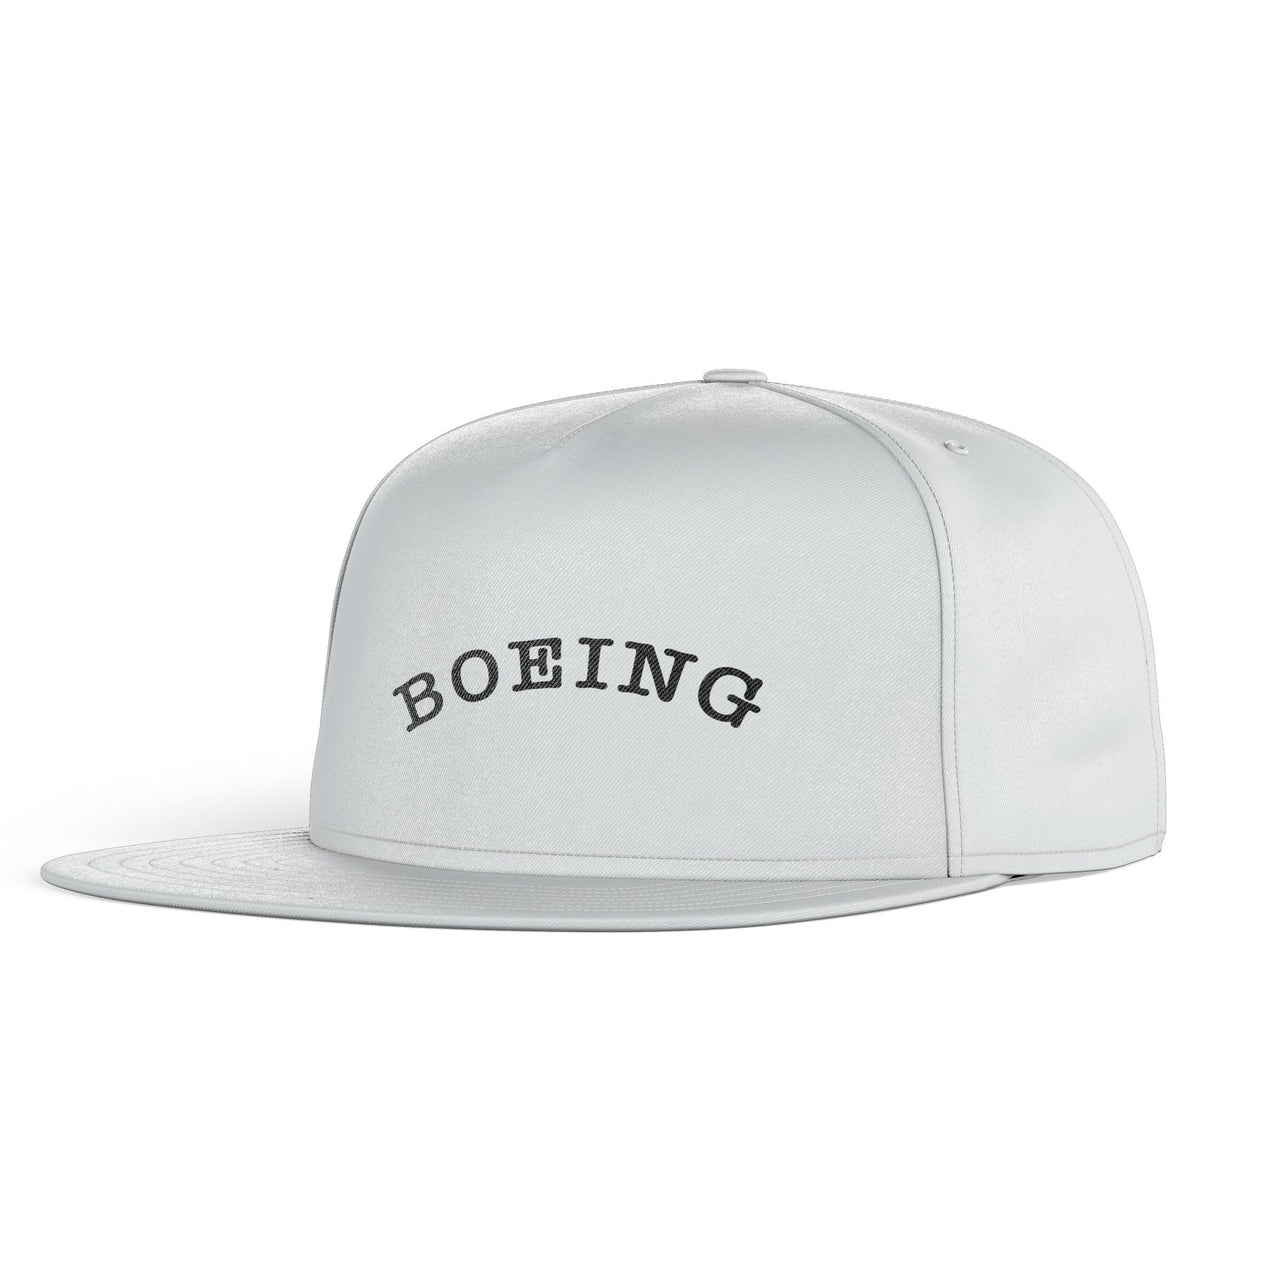 Special BOEING Text Designed Snapback Caps & Hats